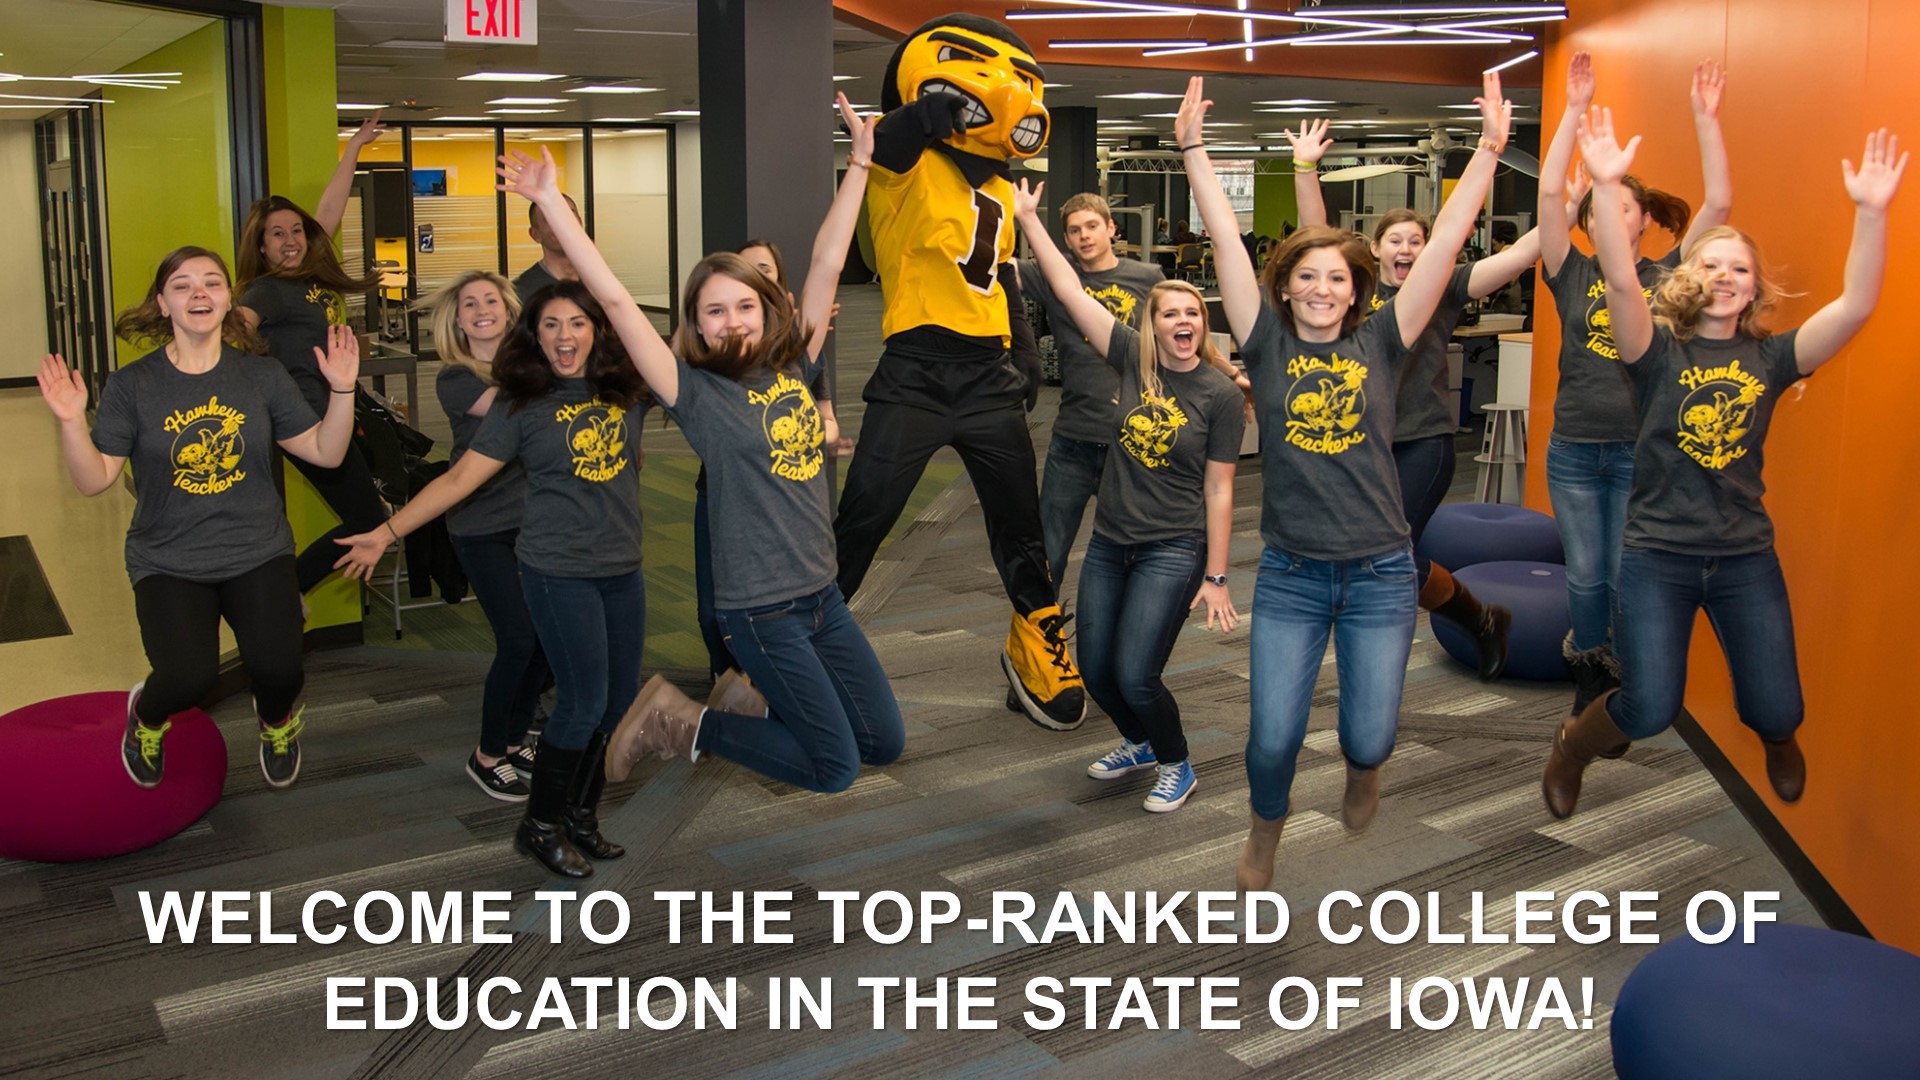 WELCOME TO THE TOP-RANKED COLLEGE OF EDUCATION IN THE STATE OF IOWA!